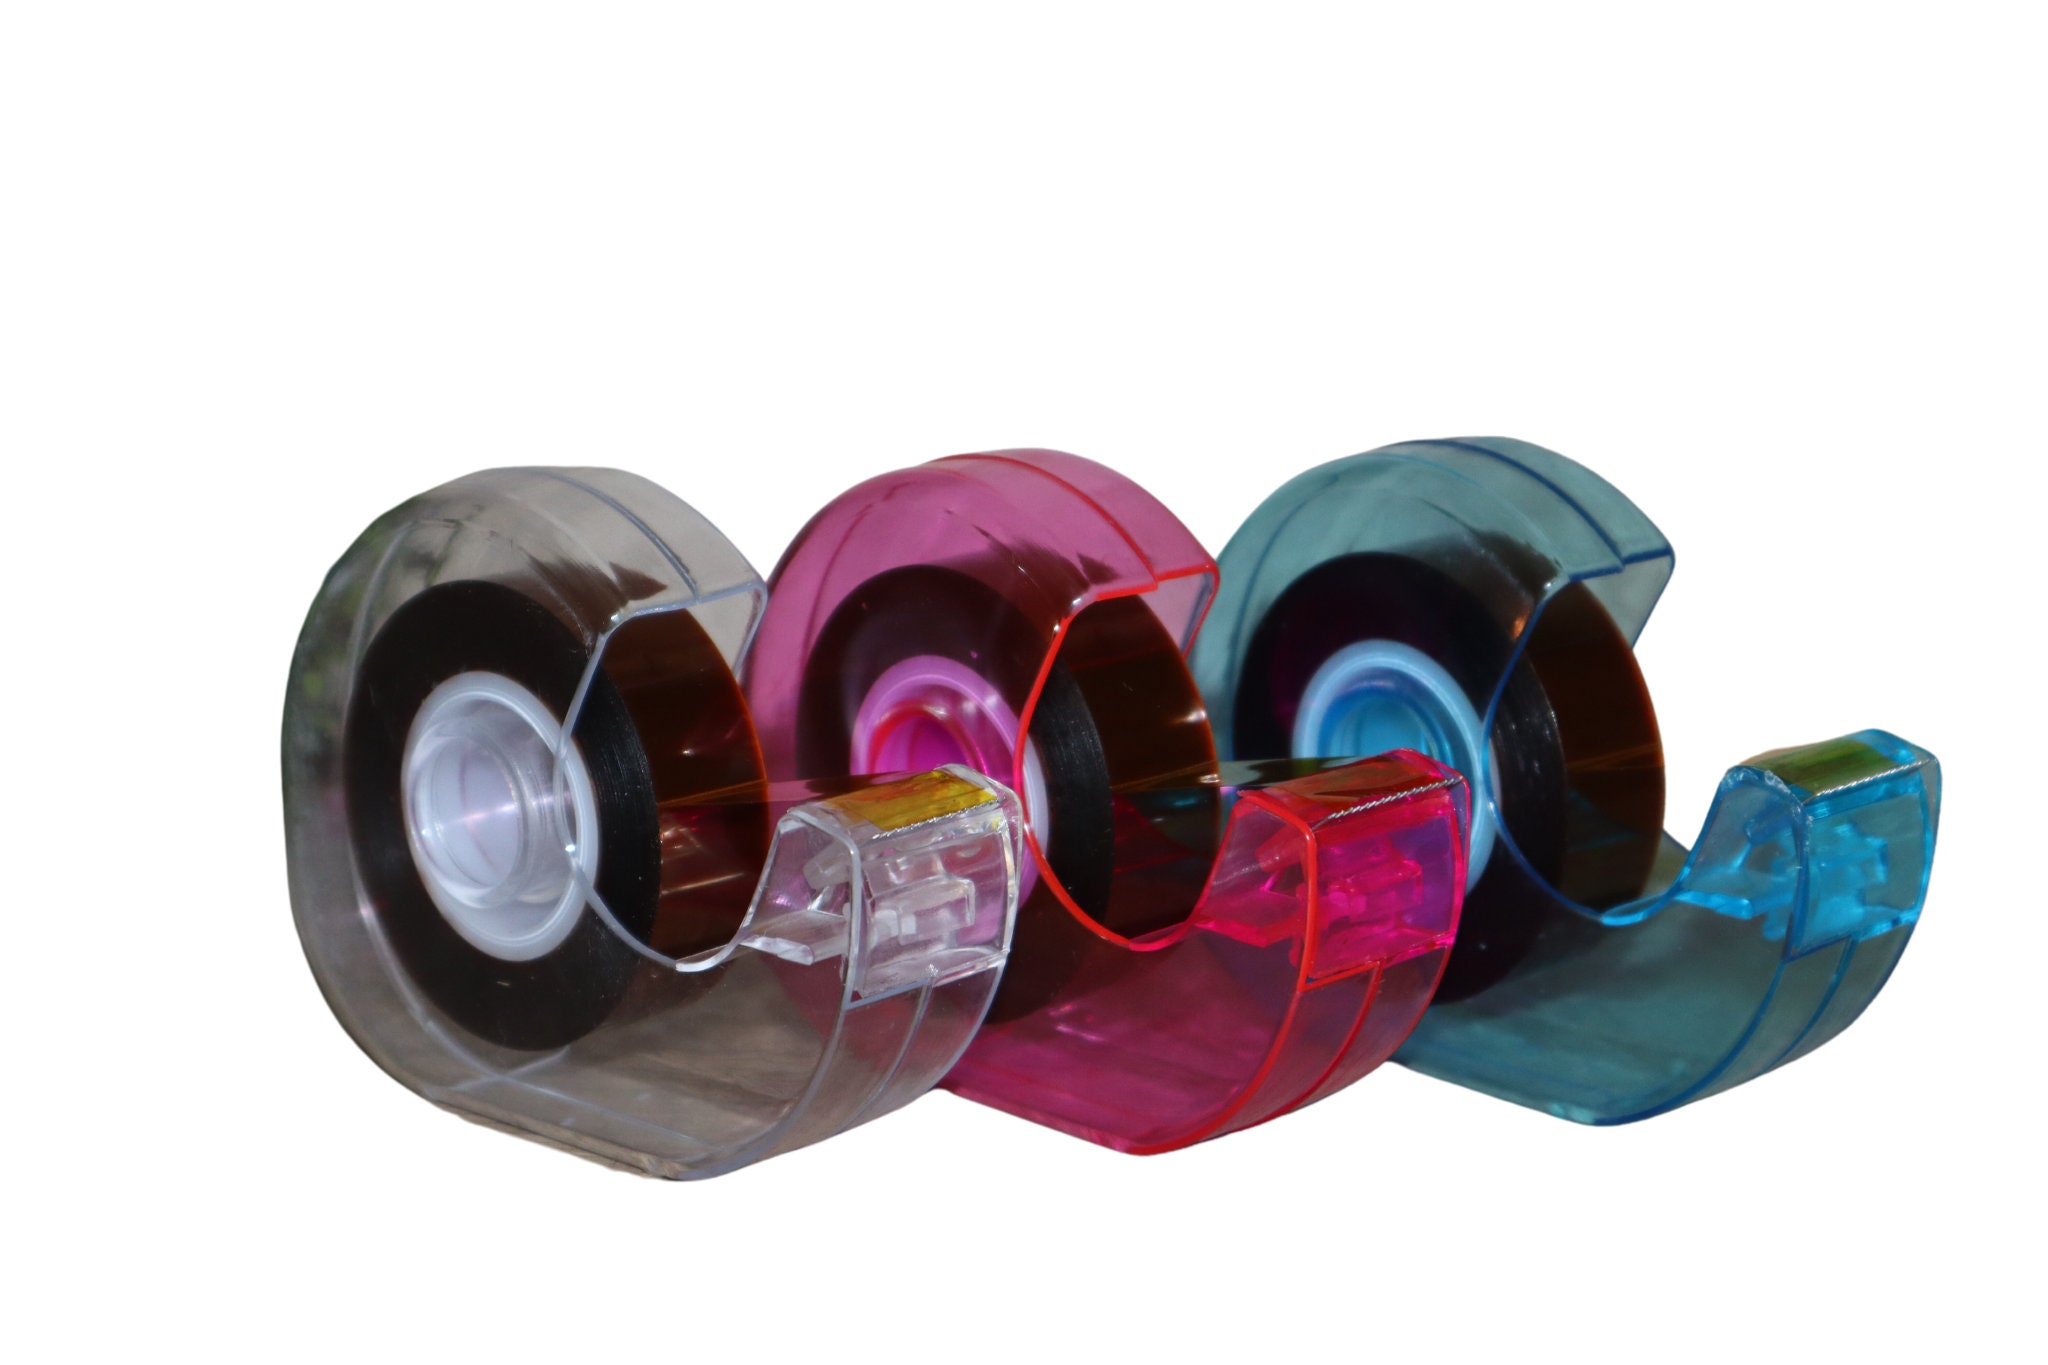 HT-PET heat Pressing Tape 54.68 Yards Roll available in 3 Colors